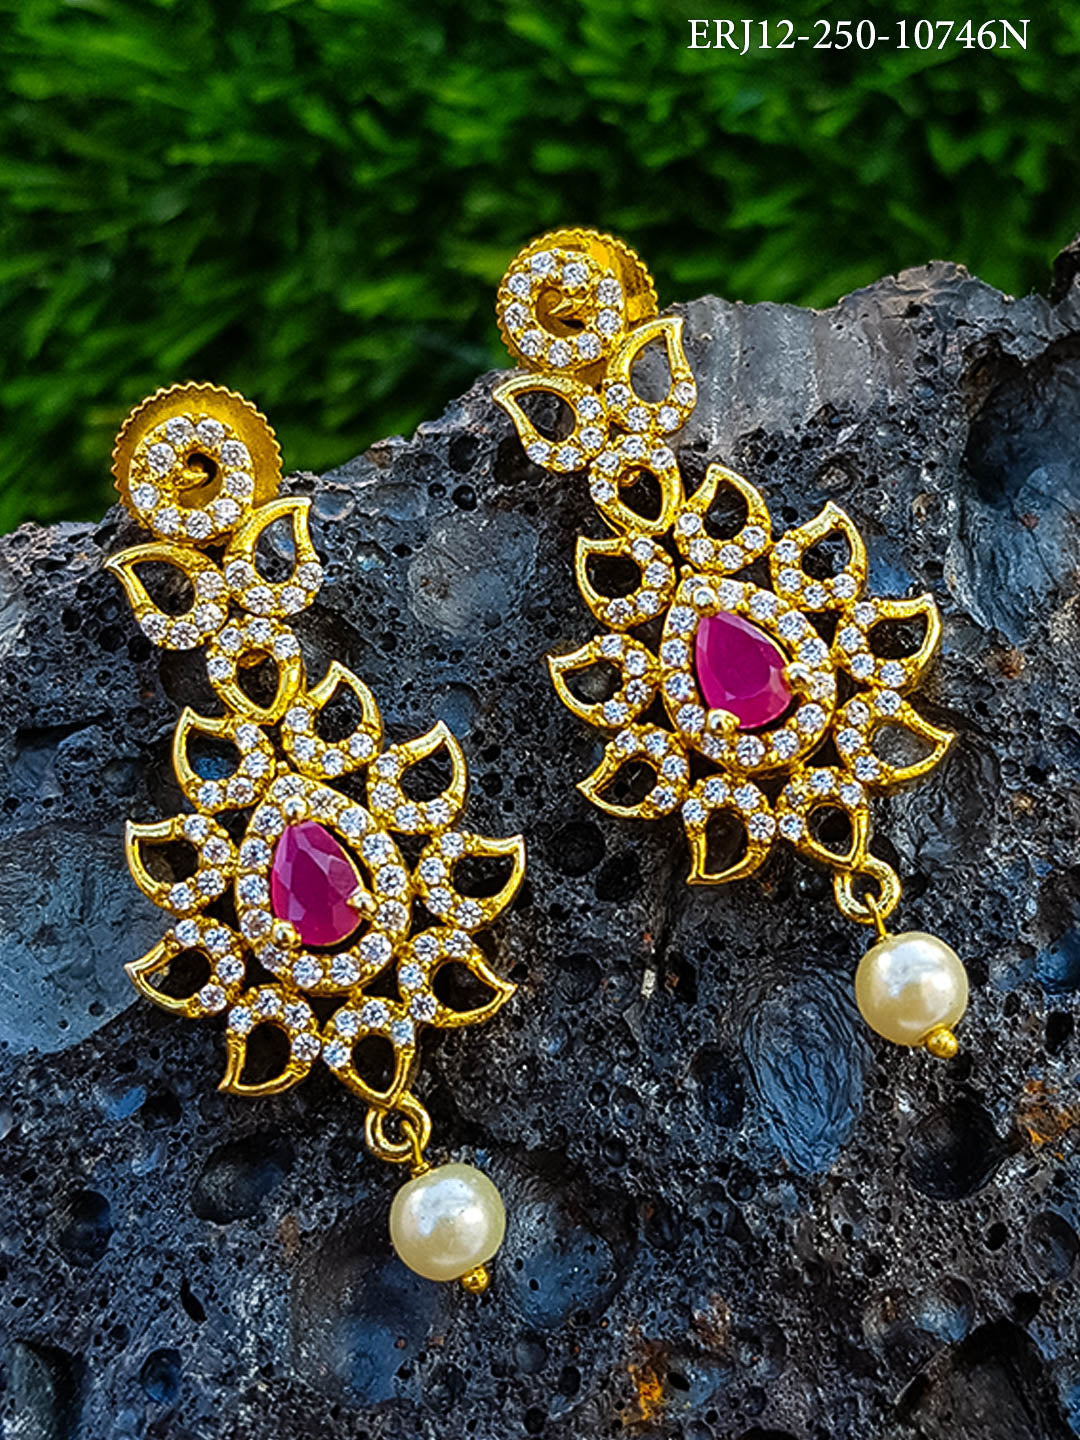 Gold Plated Top quality Real CZ Stones Jumkis / Earrings / Hangings 10746N